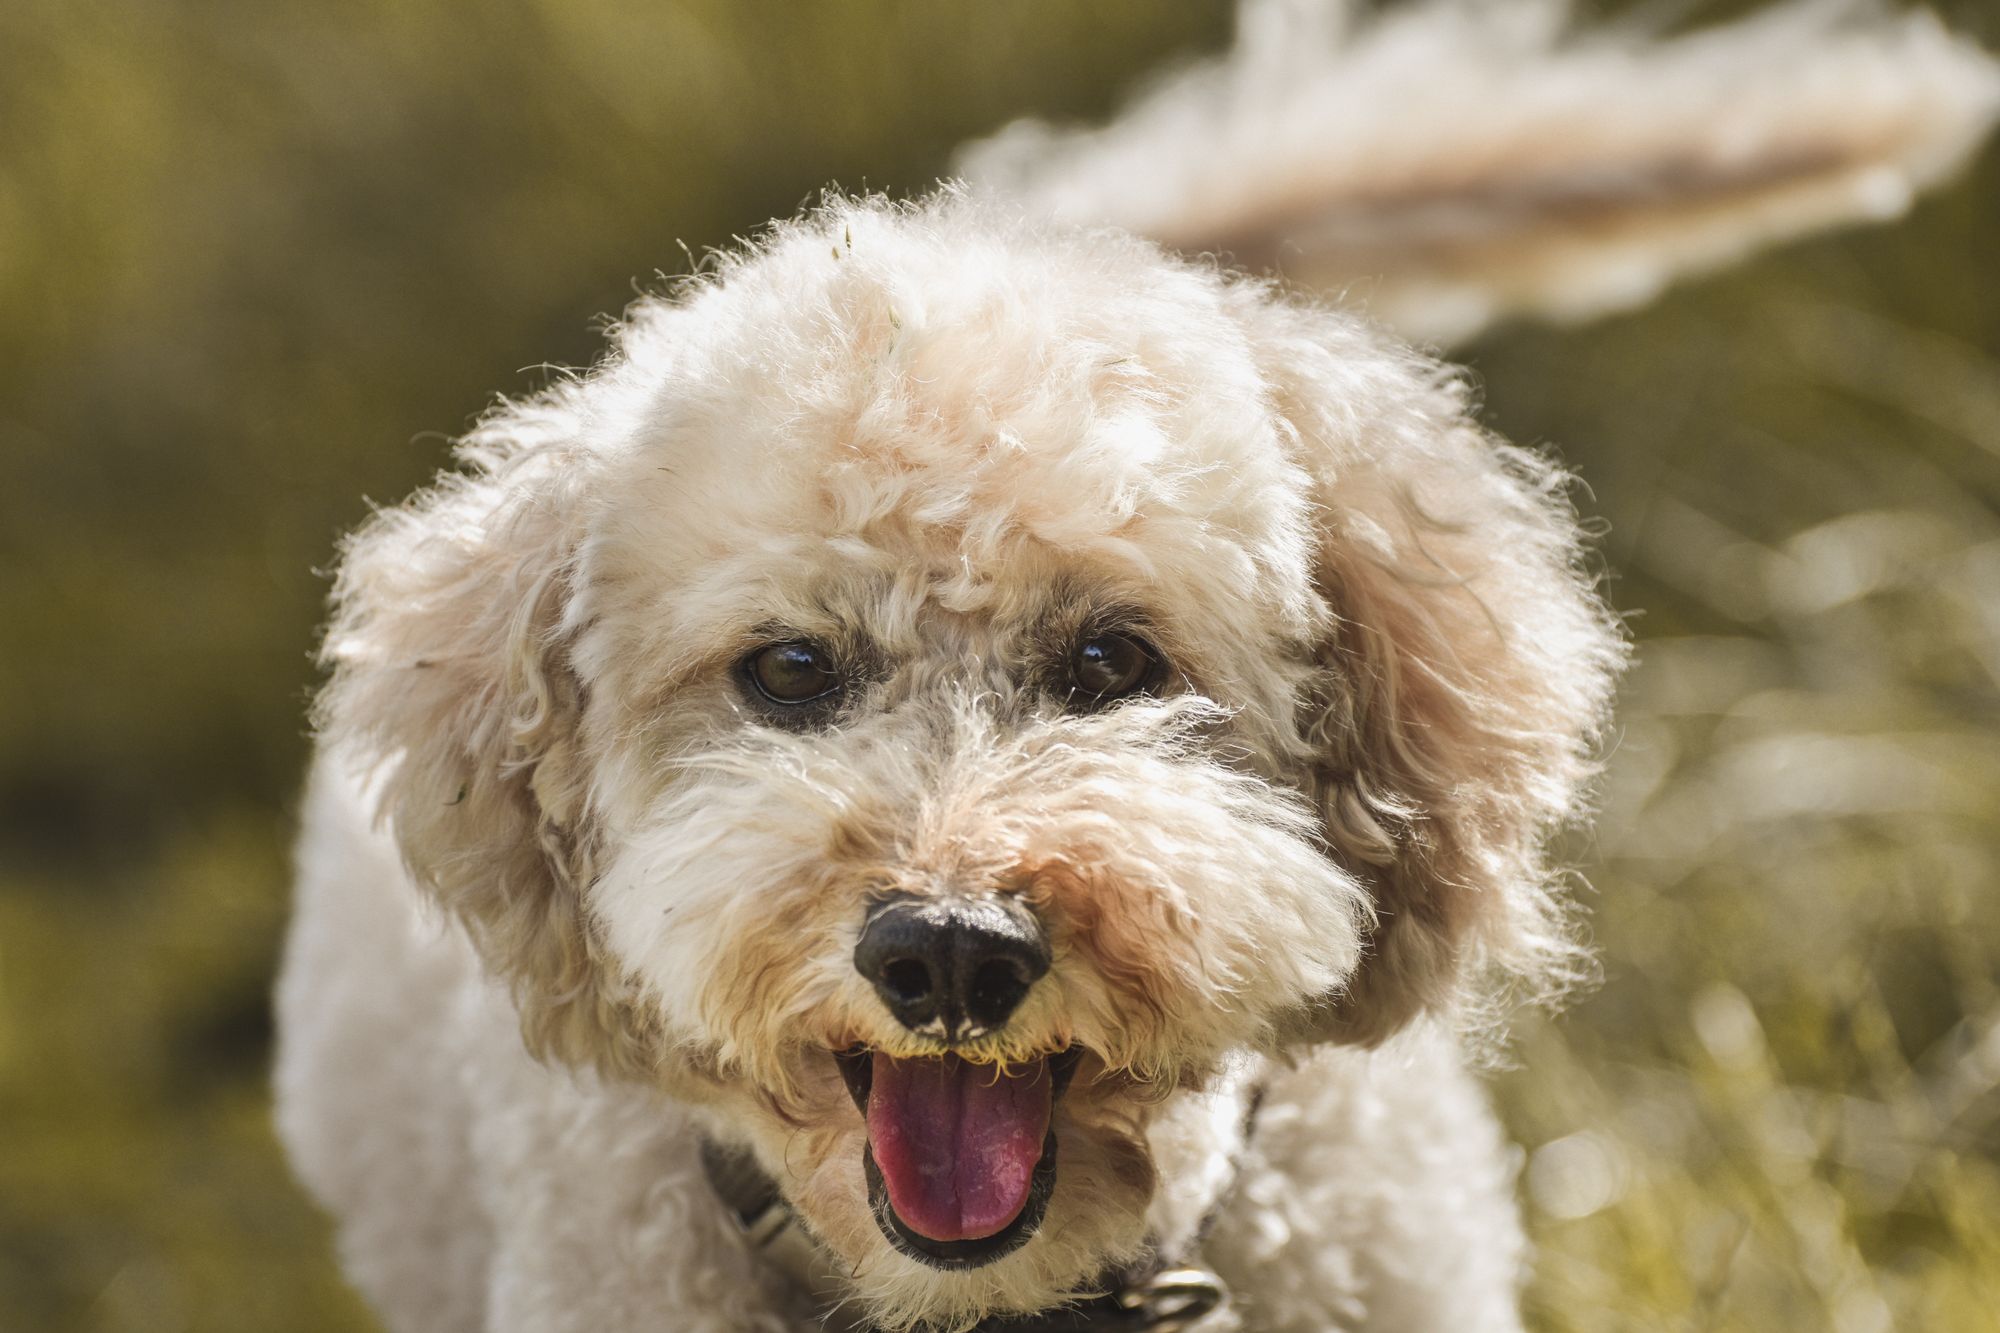 What Is the #1 Hypoallergenic Dog Breed?